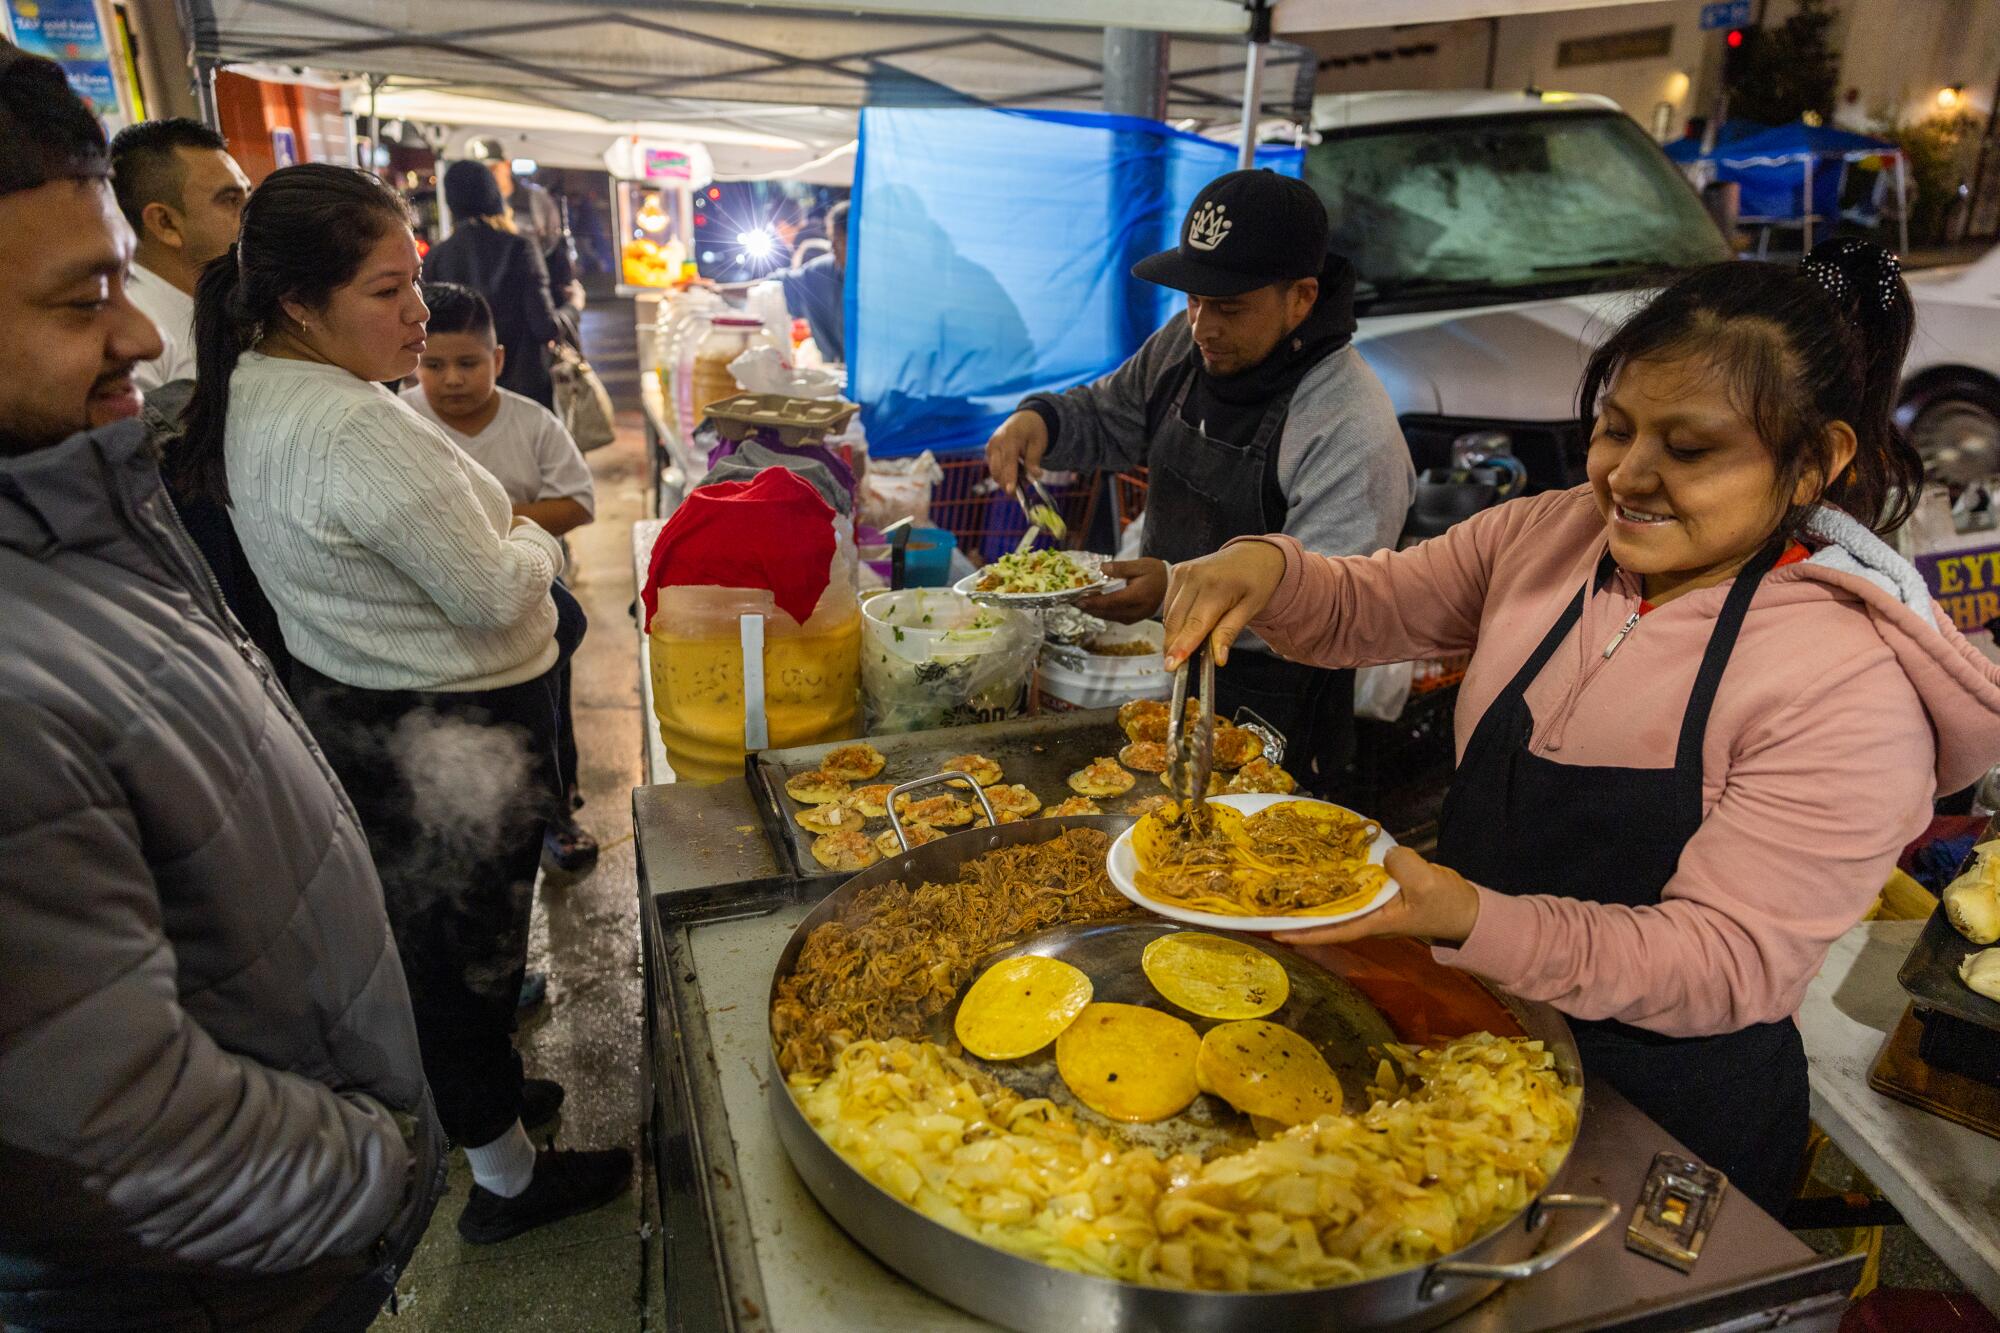 Customers wait for their food as a woman serves tacos at an outdoor market